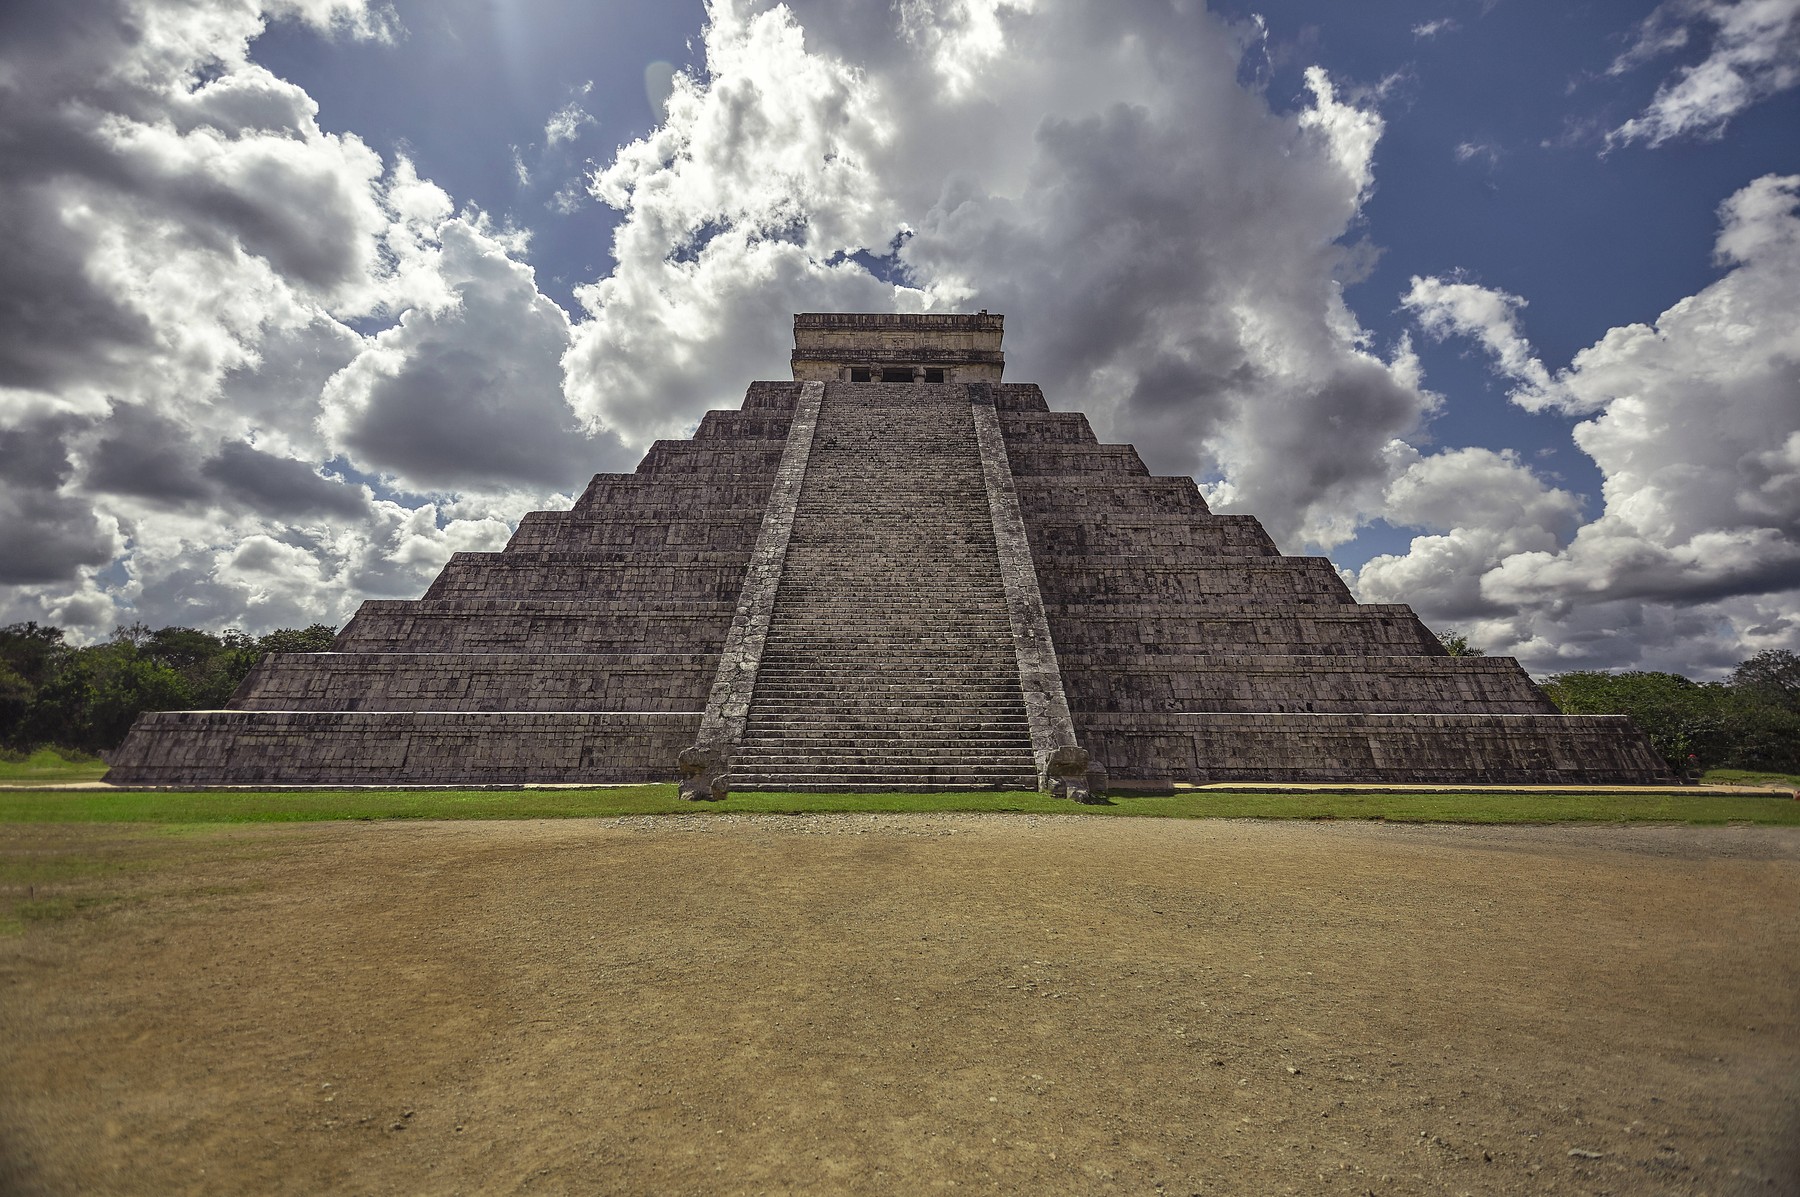 The grave robbers didn't touch it either, as they found amazing remains in the Mayan pyramid